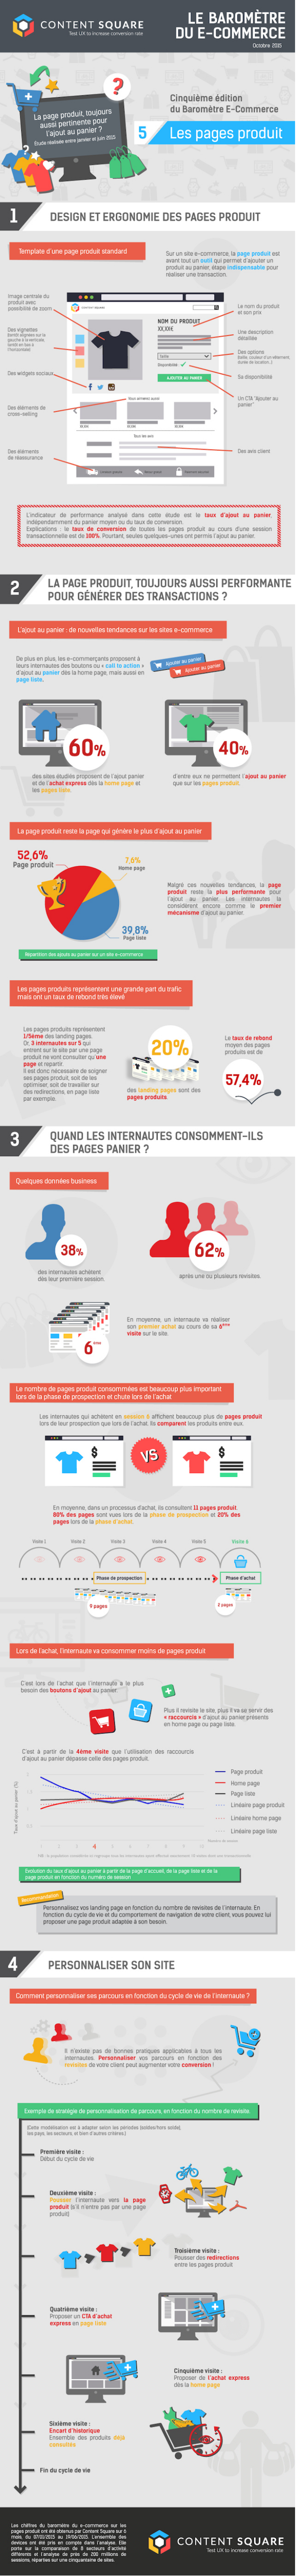 ecommerce infographie